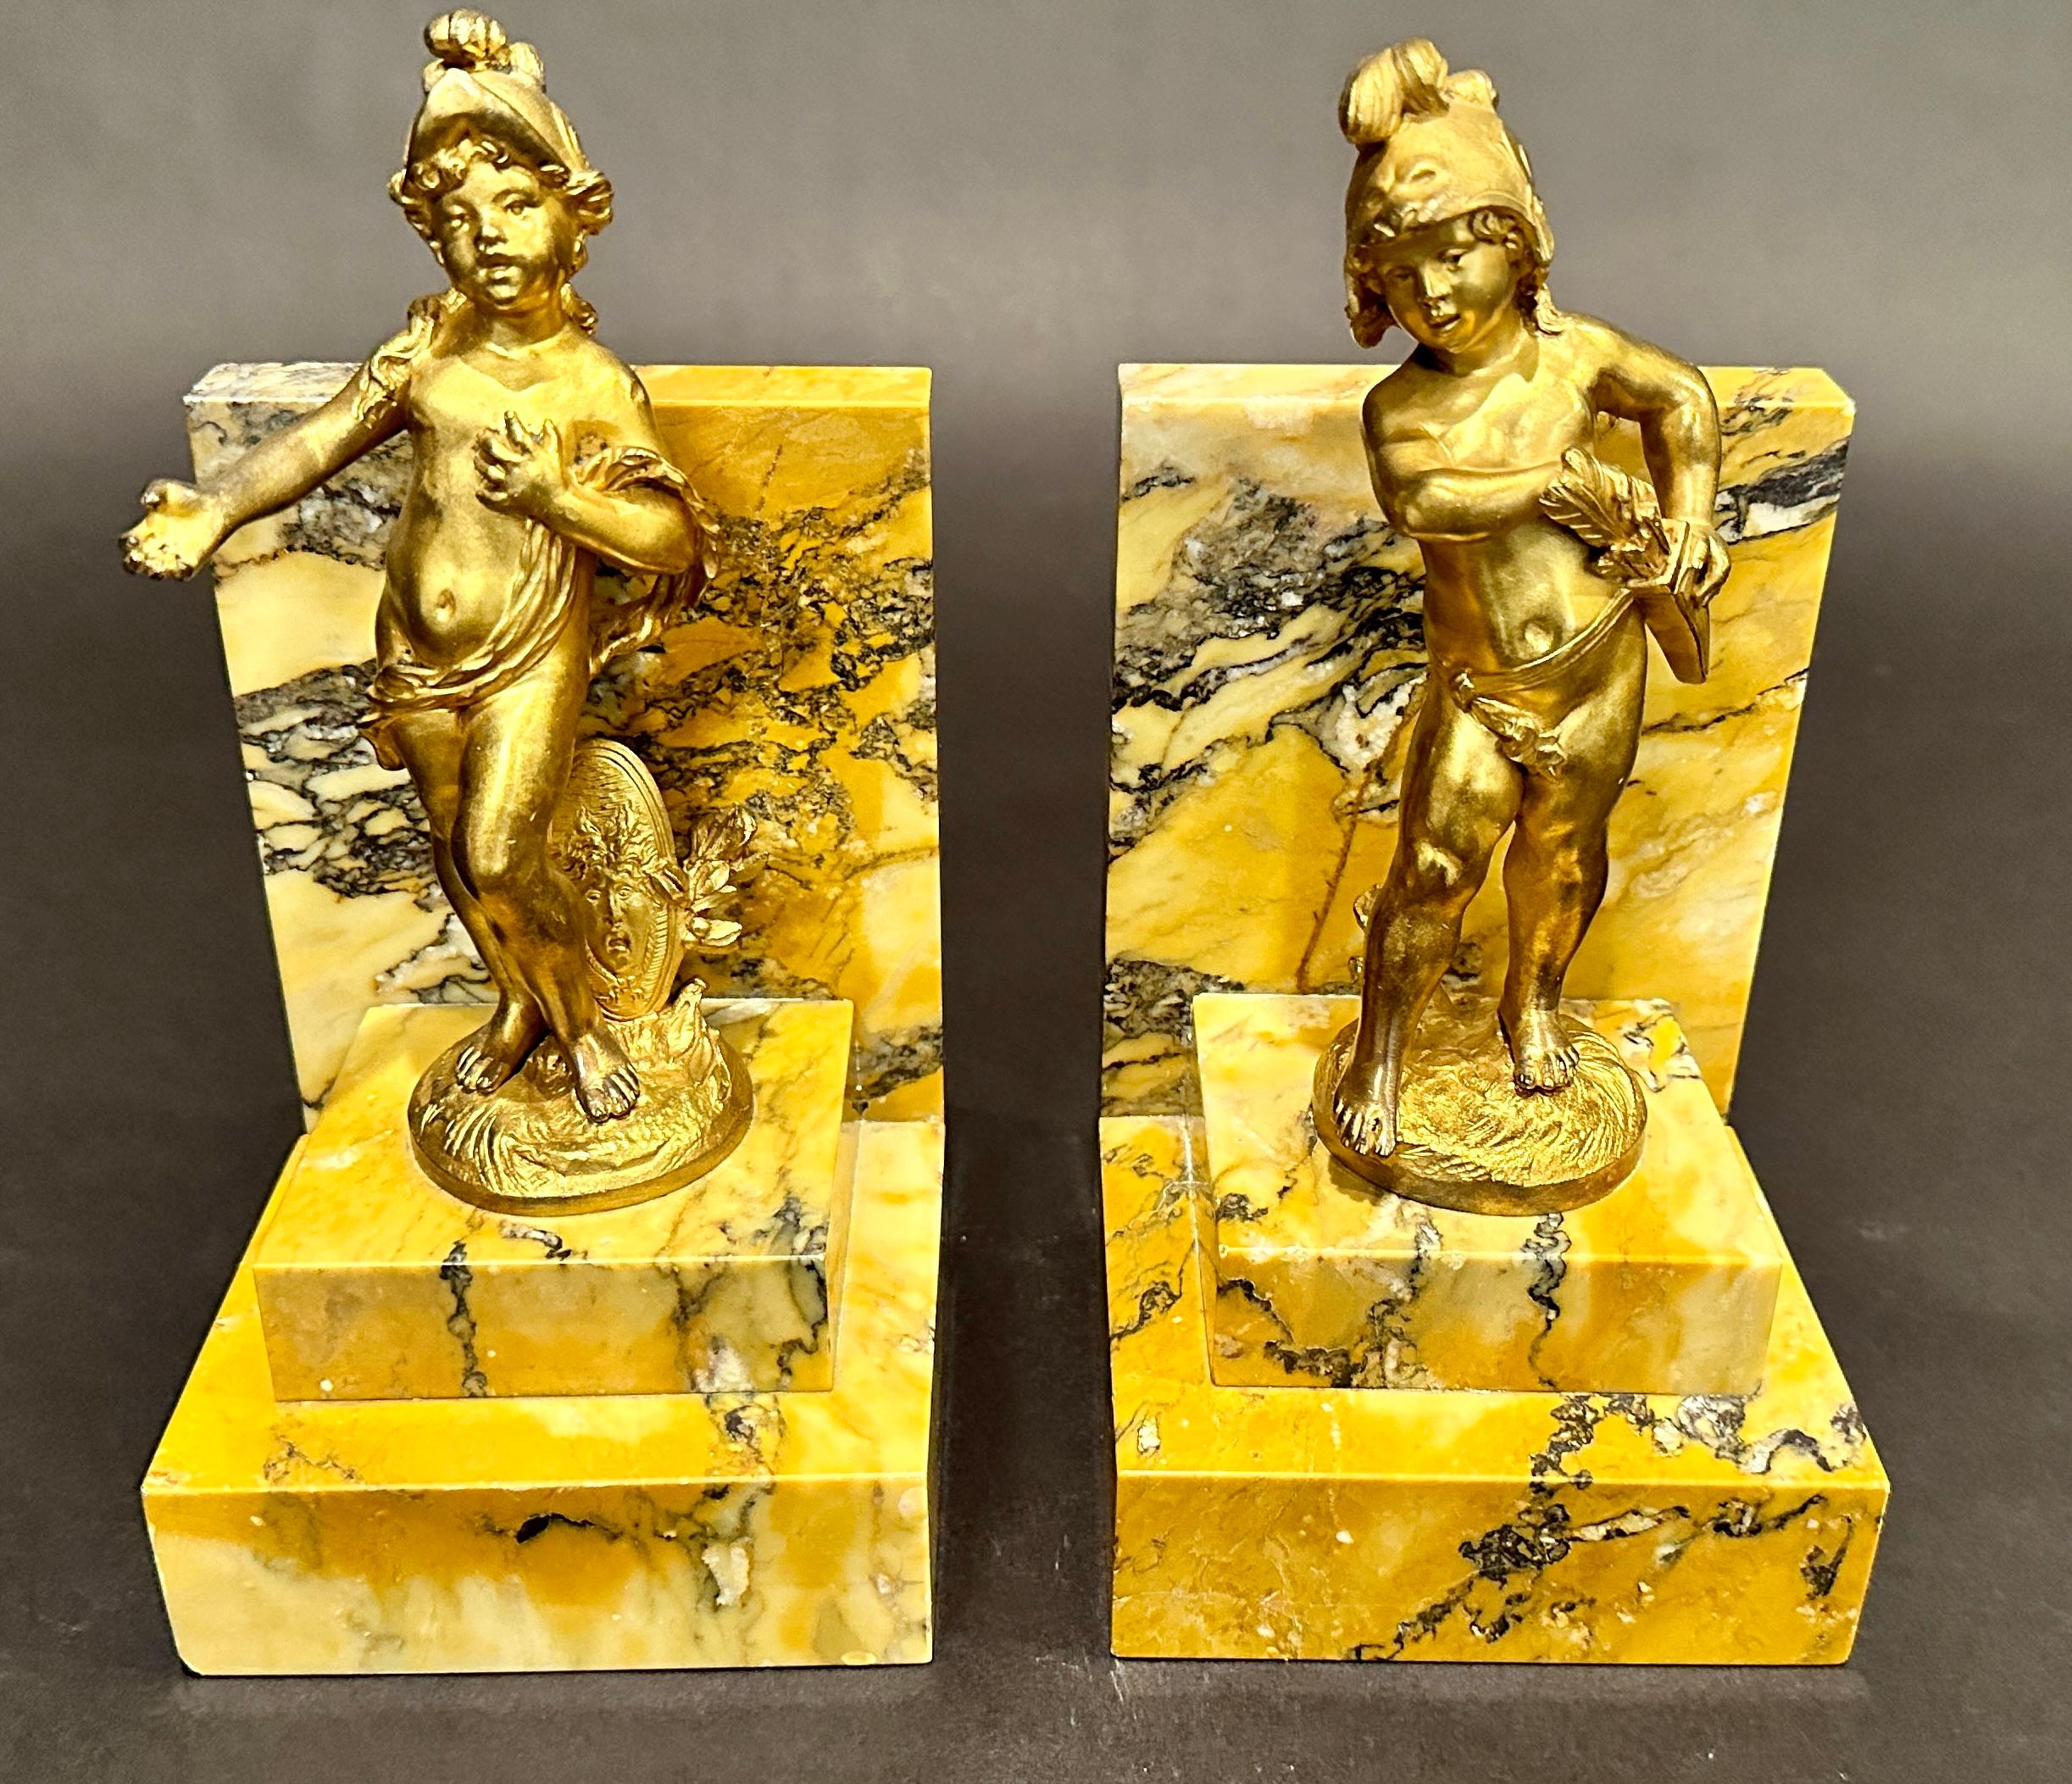 Fine quality pair of figural 19th century gilt bronze bookends by Auguste Moreau. Signed. Young boy and girl depicting warriors, with shield, sword and helmet. Mounted on stepped Italian yellow marble.